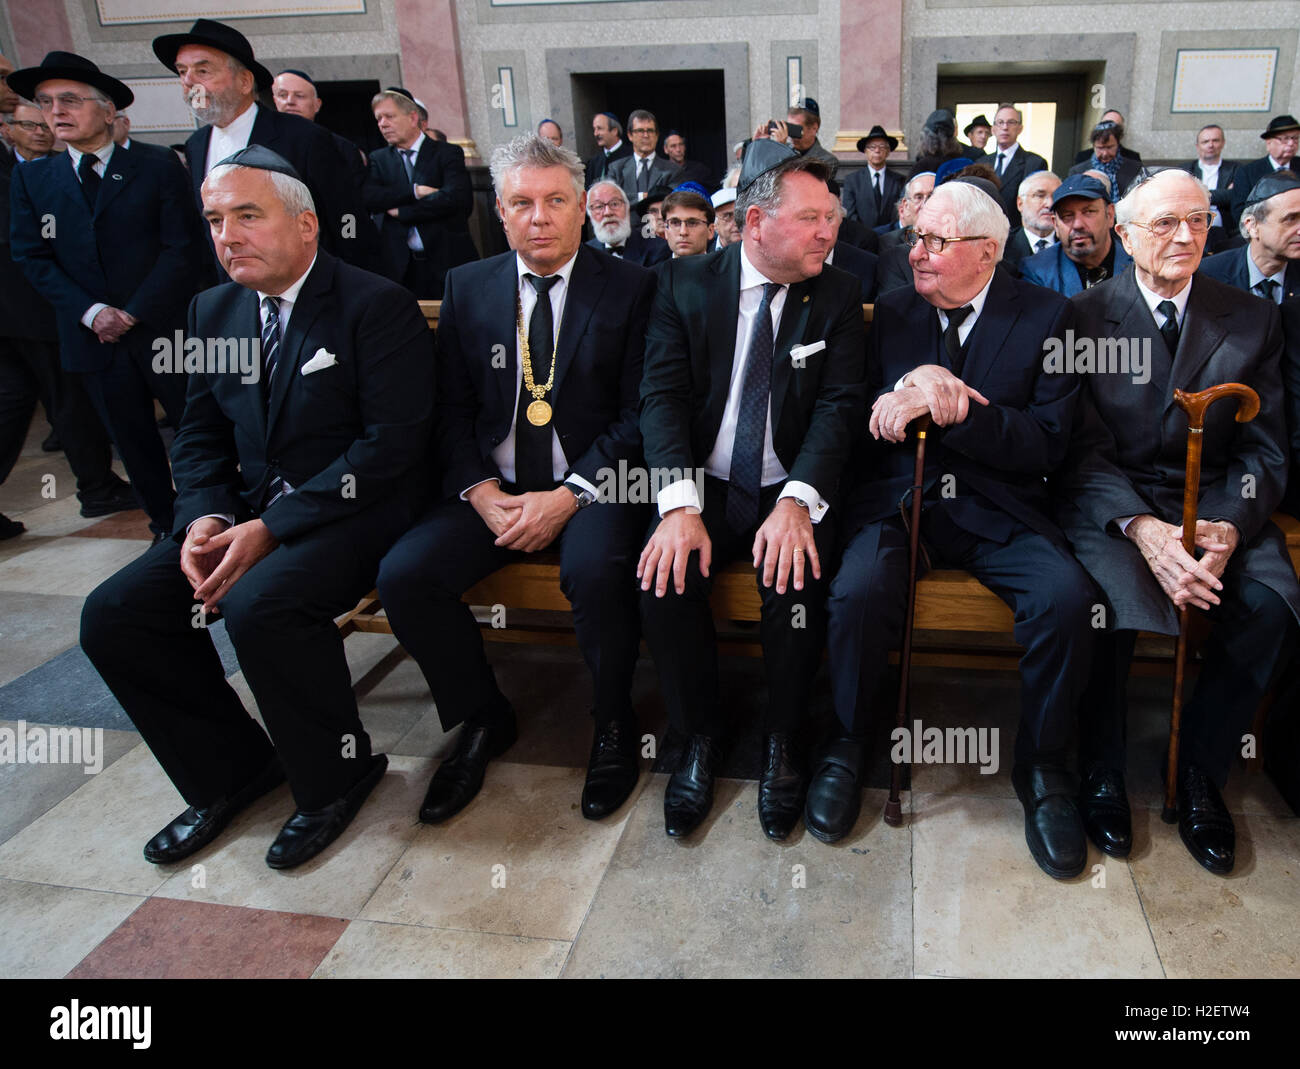 Munich, Germany. 27th Sep, 2016. Education Minister of Bavaria, Ludwig Spaenle (CSU, l-r), the Mayor of Munich. Dieter Reiter (SPD), the Vice Mayor of Munich, Josef Schmid (CSU), former SPD party leader Hans-Jochen Vogel and Franz of Bavaria sit at the funeral of holocaust survivor Max Mannheimer at the Isrealite graveyard in Munich, Germany, 27 September 2016. Mannehimer had died in Munich at the age of 96 on 23 September 2016. PHOTO: MATTHIAS BALK/dpa/Alamy Live News Stock Photo